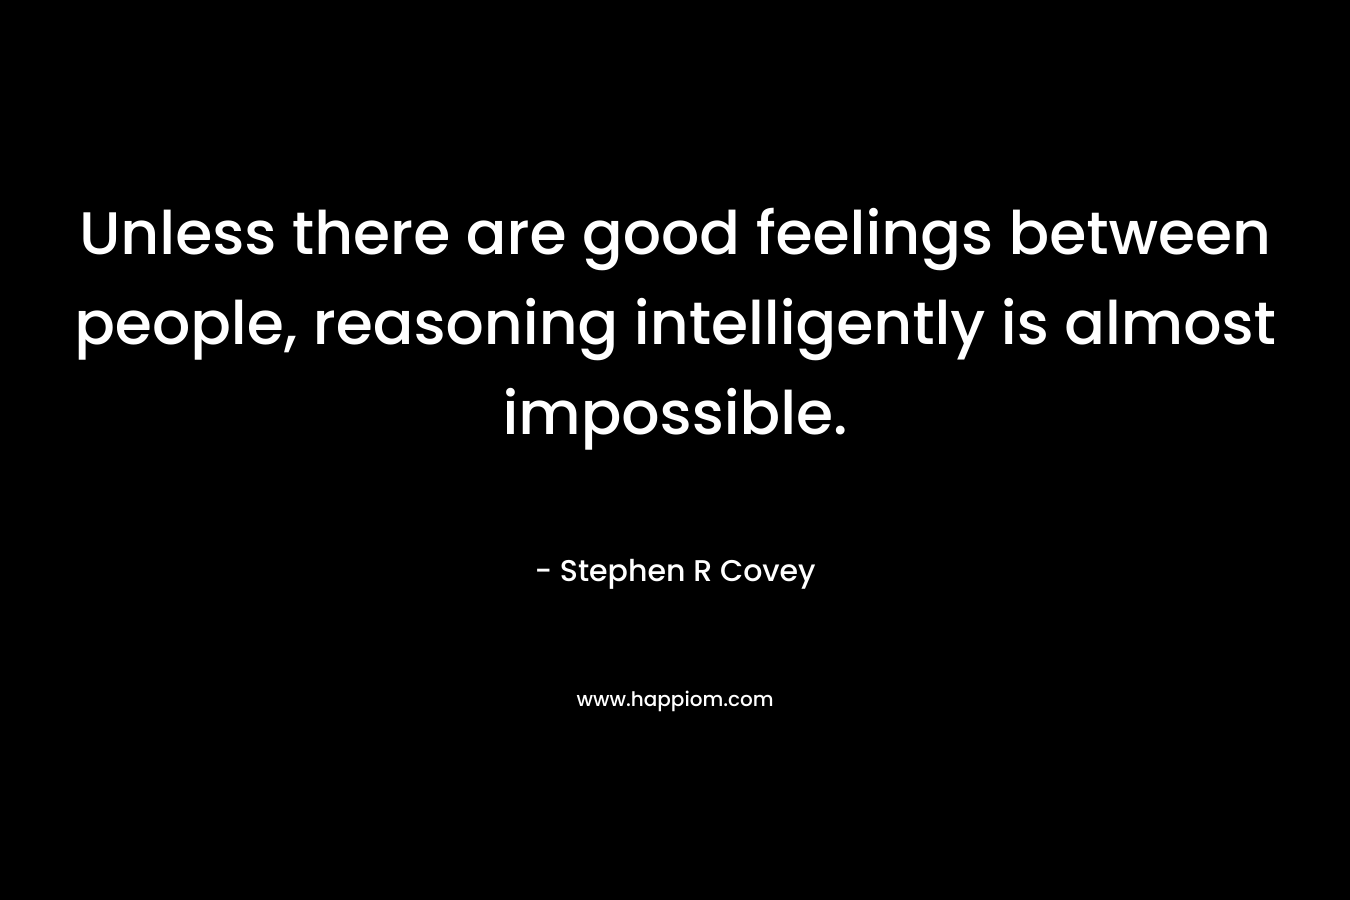 Unless there are good feelings between people, reasoning intelligently is almost impossible. – Stephen R Covey